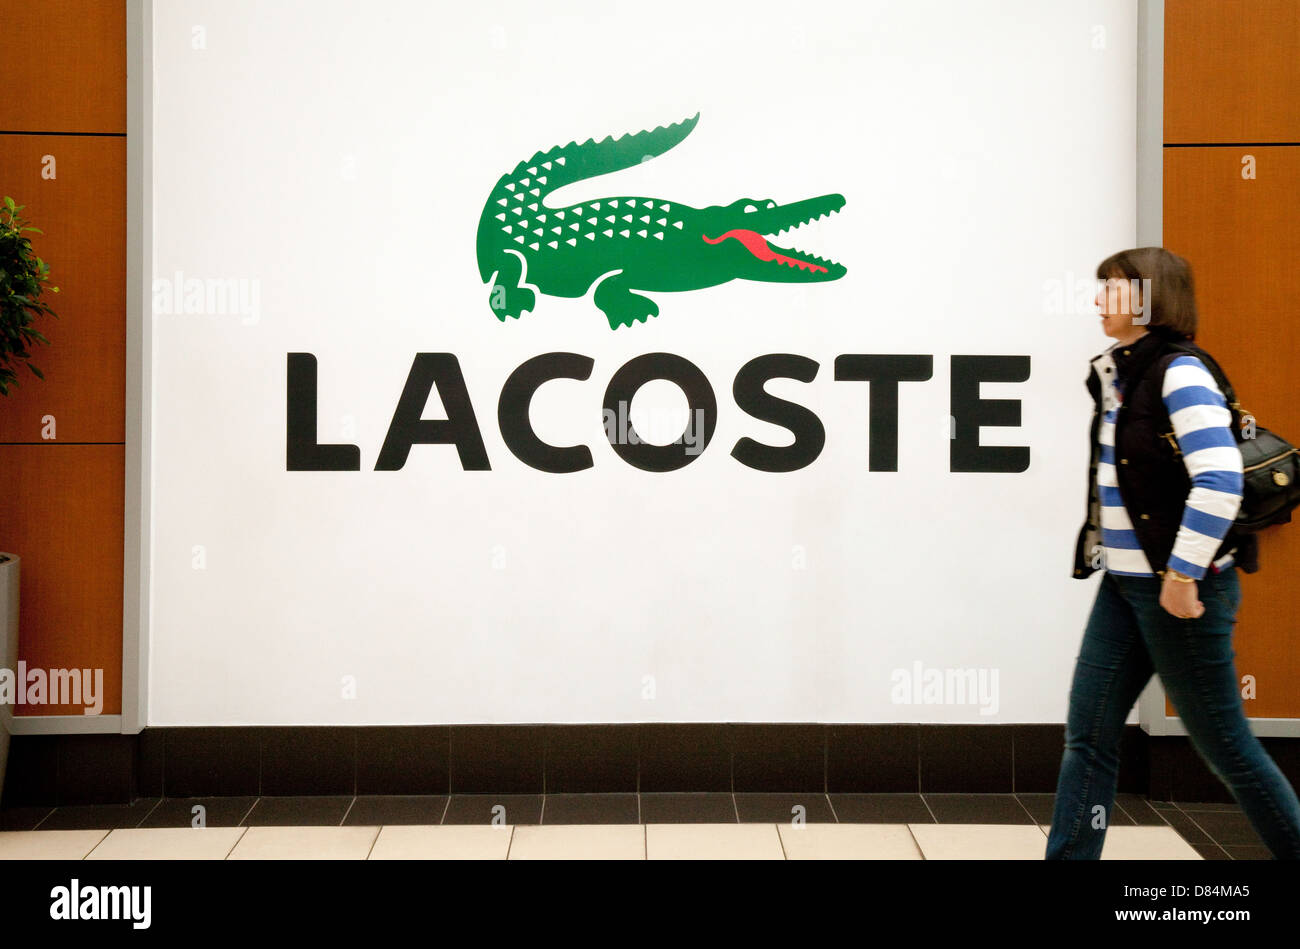 Lacoste Crocodile - the Lacoste Logo on a large sign for Lacoste fashion store shop, UK Stock Photo